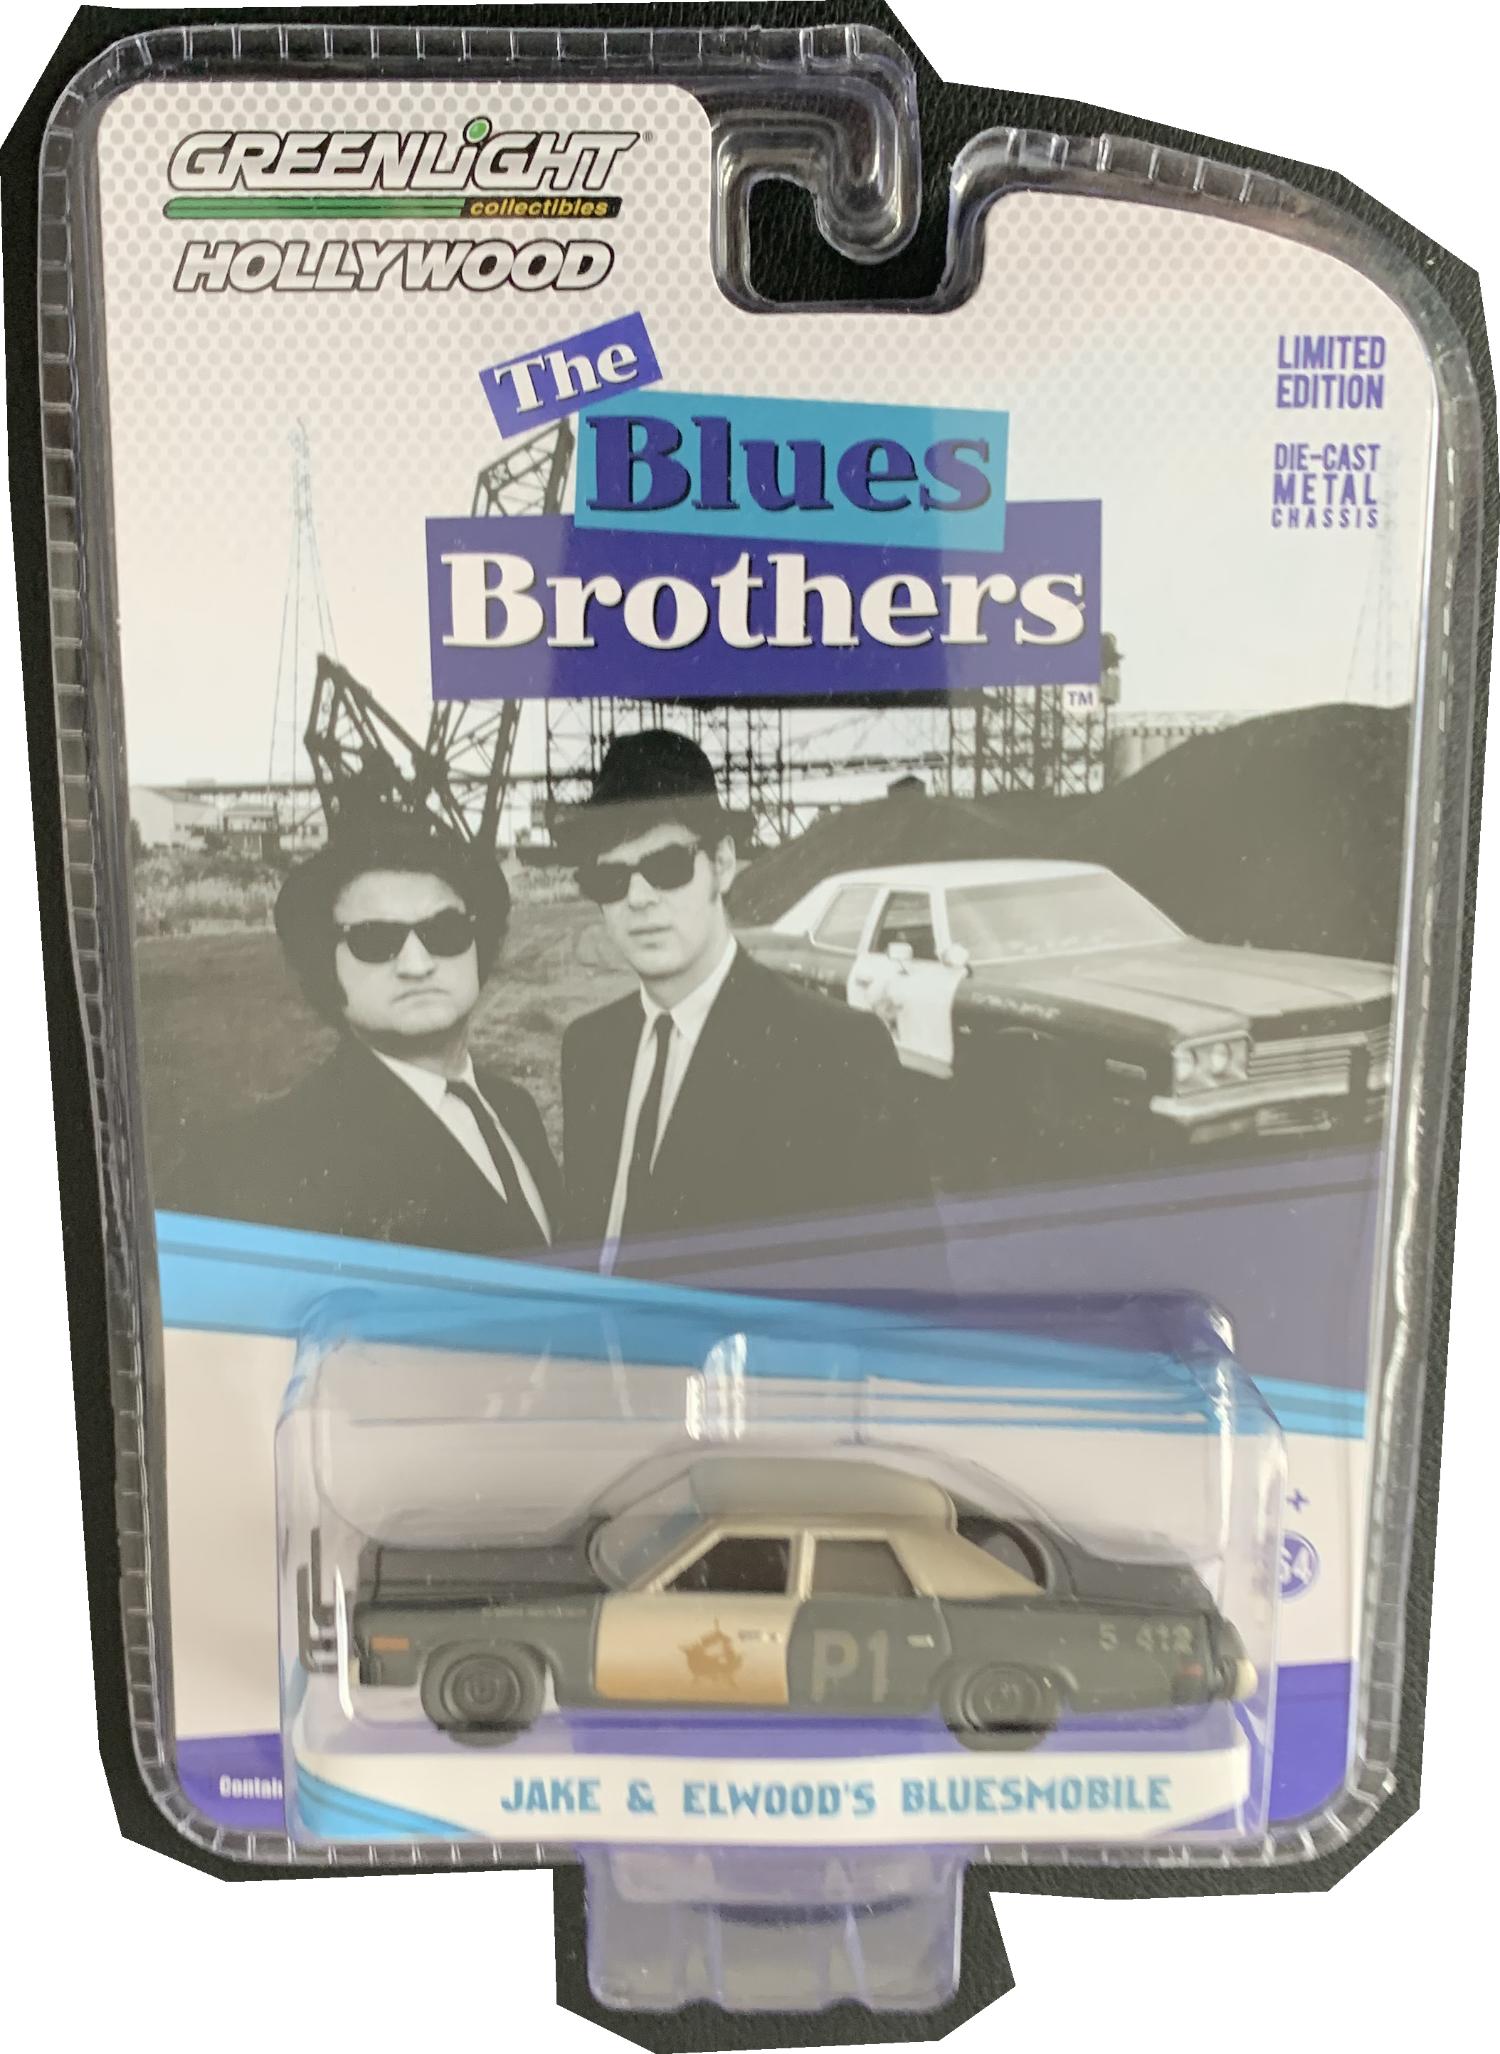 The Blues Brothers 1975 Dodge Monaco Bluesmobile 1:64 scale model from Greenlight